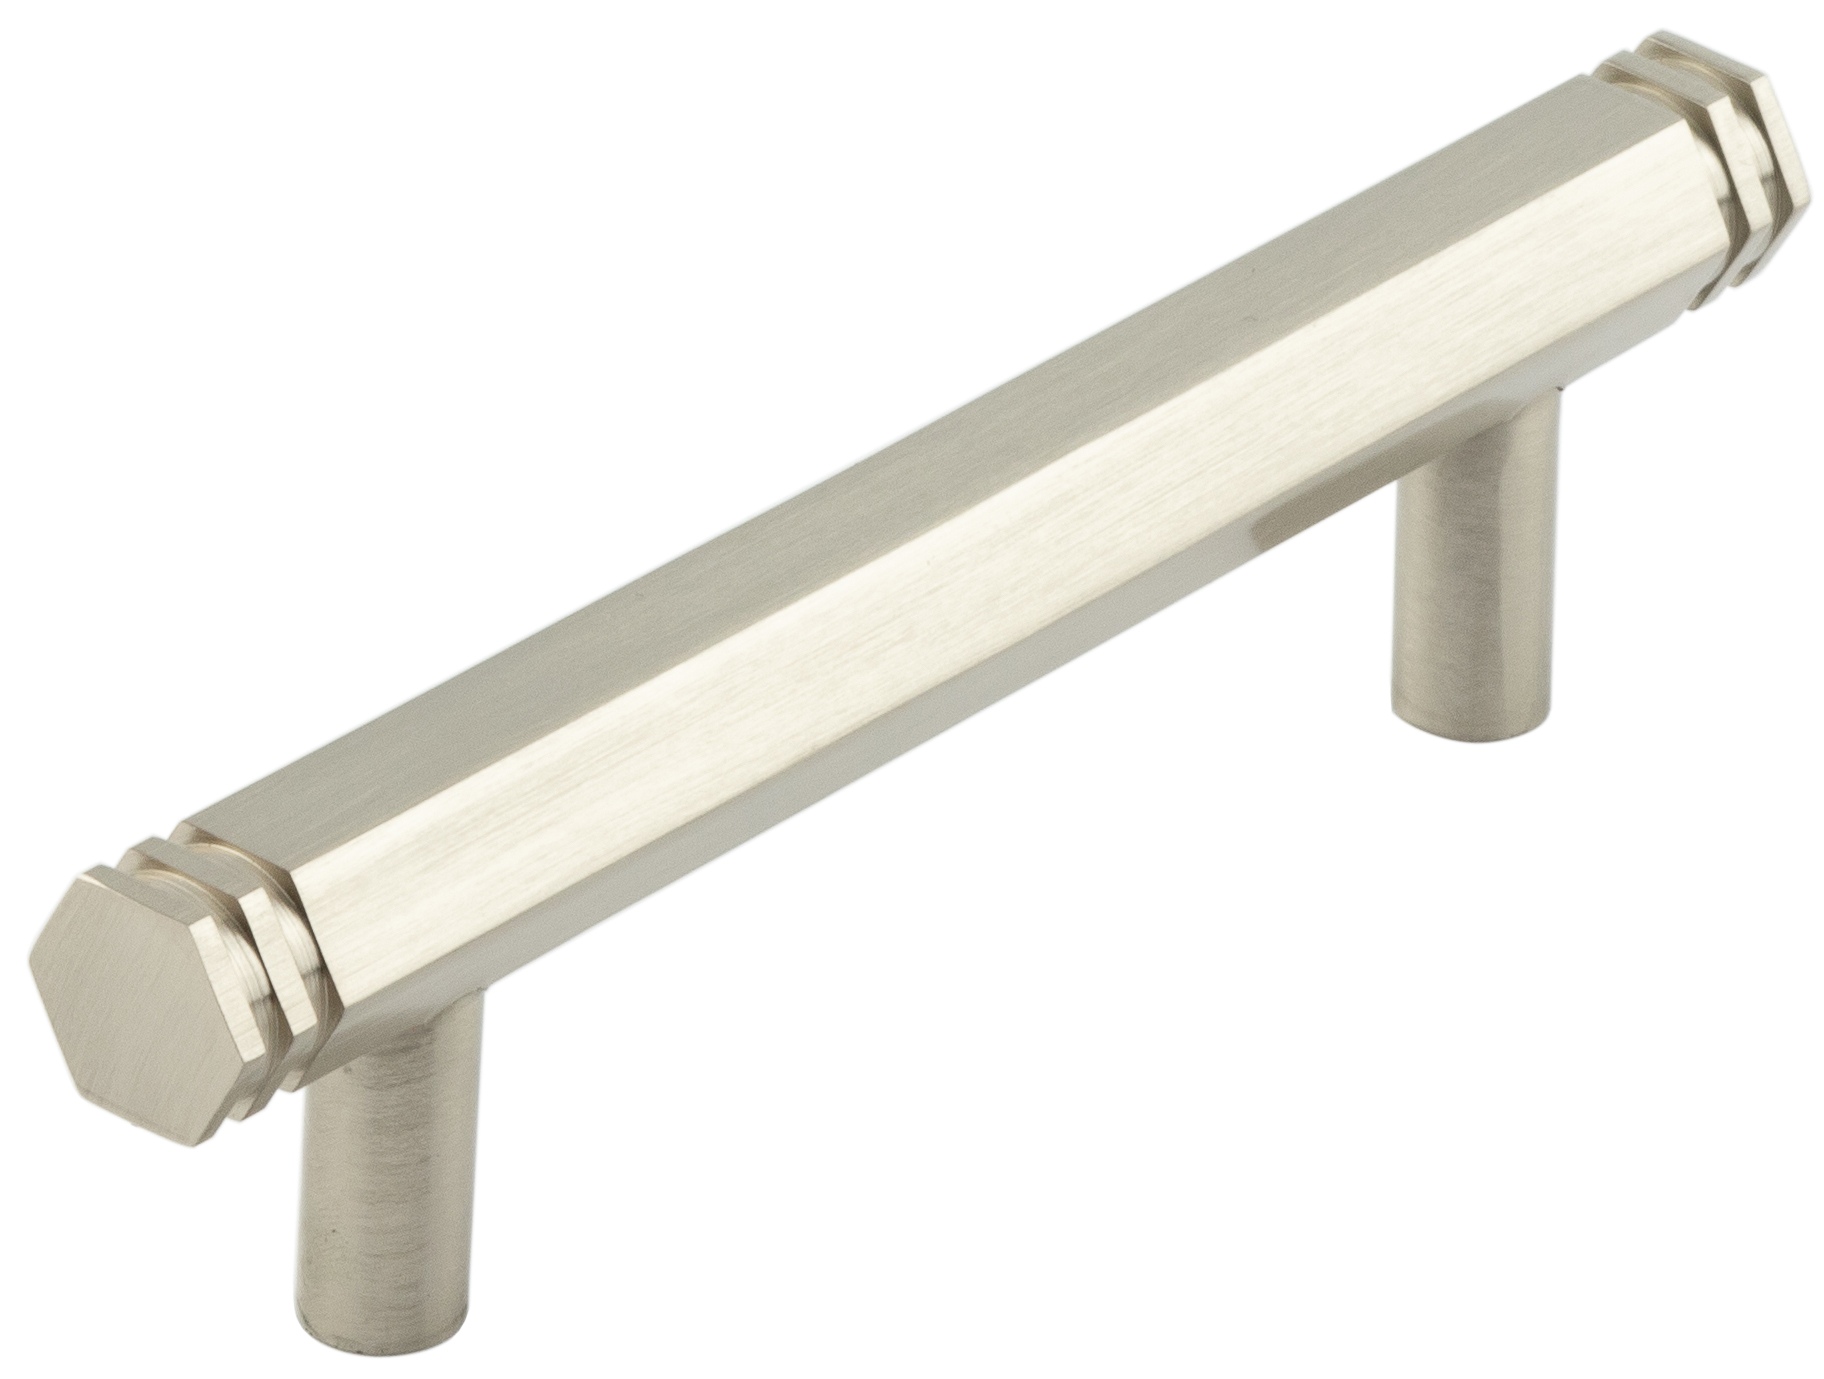 Nile Sn 96mm Hex Cabinet Handle With End Step Detail